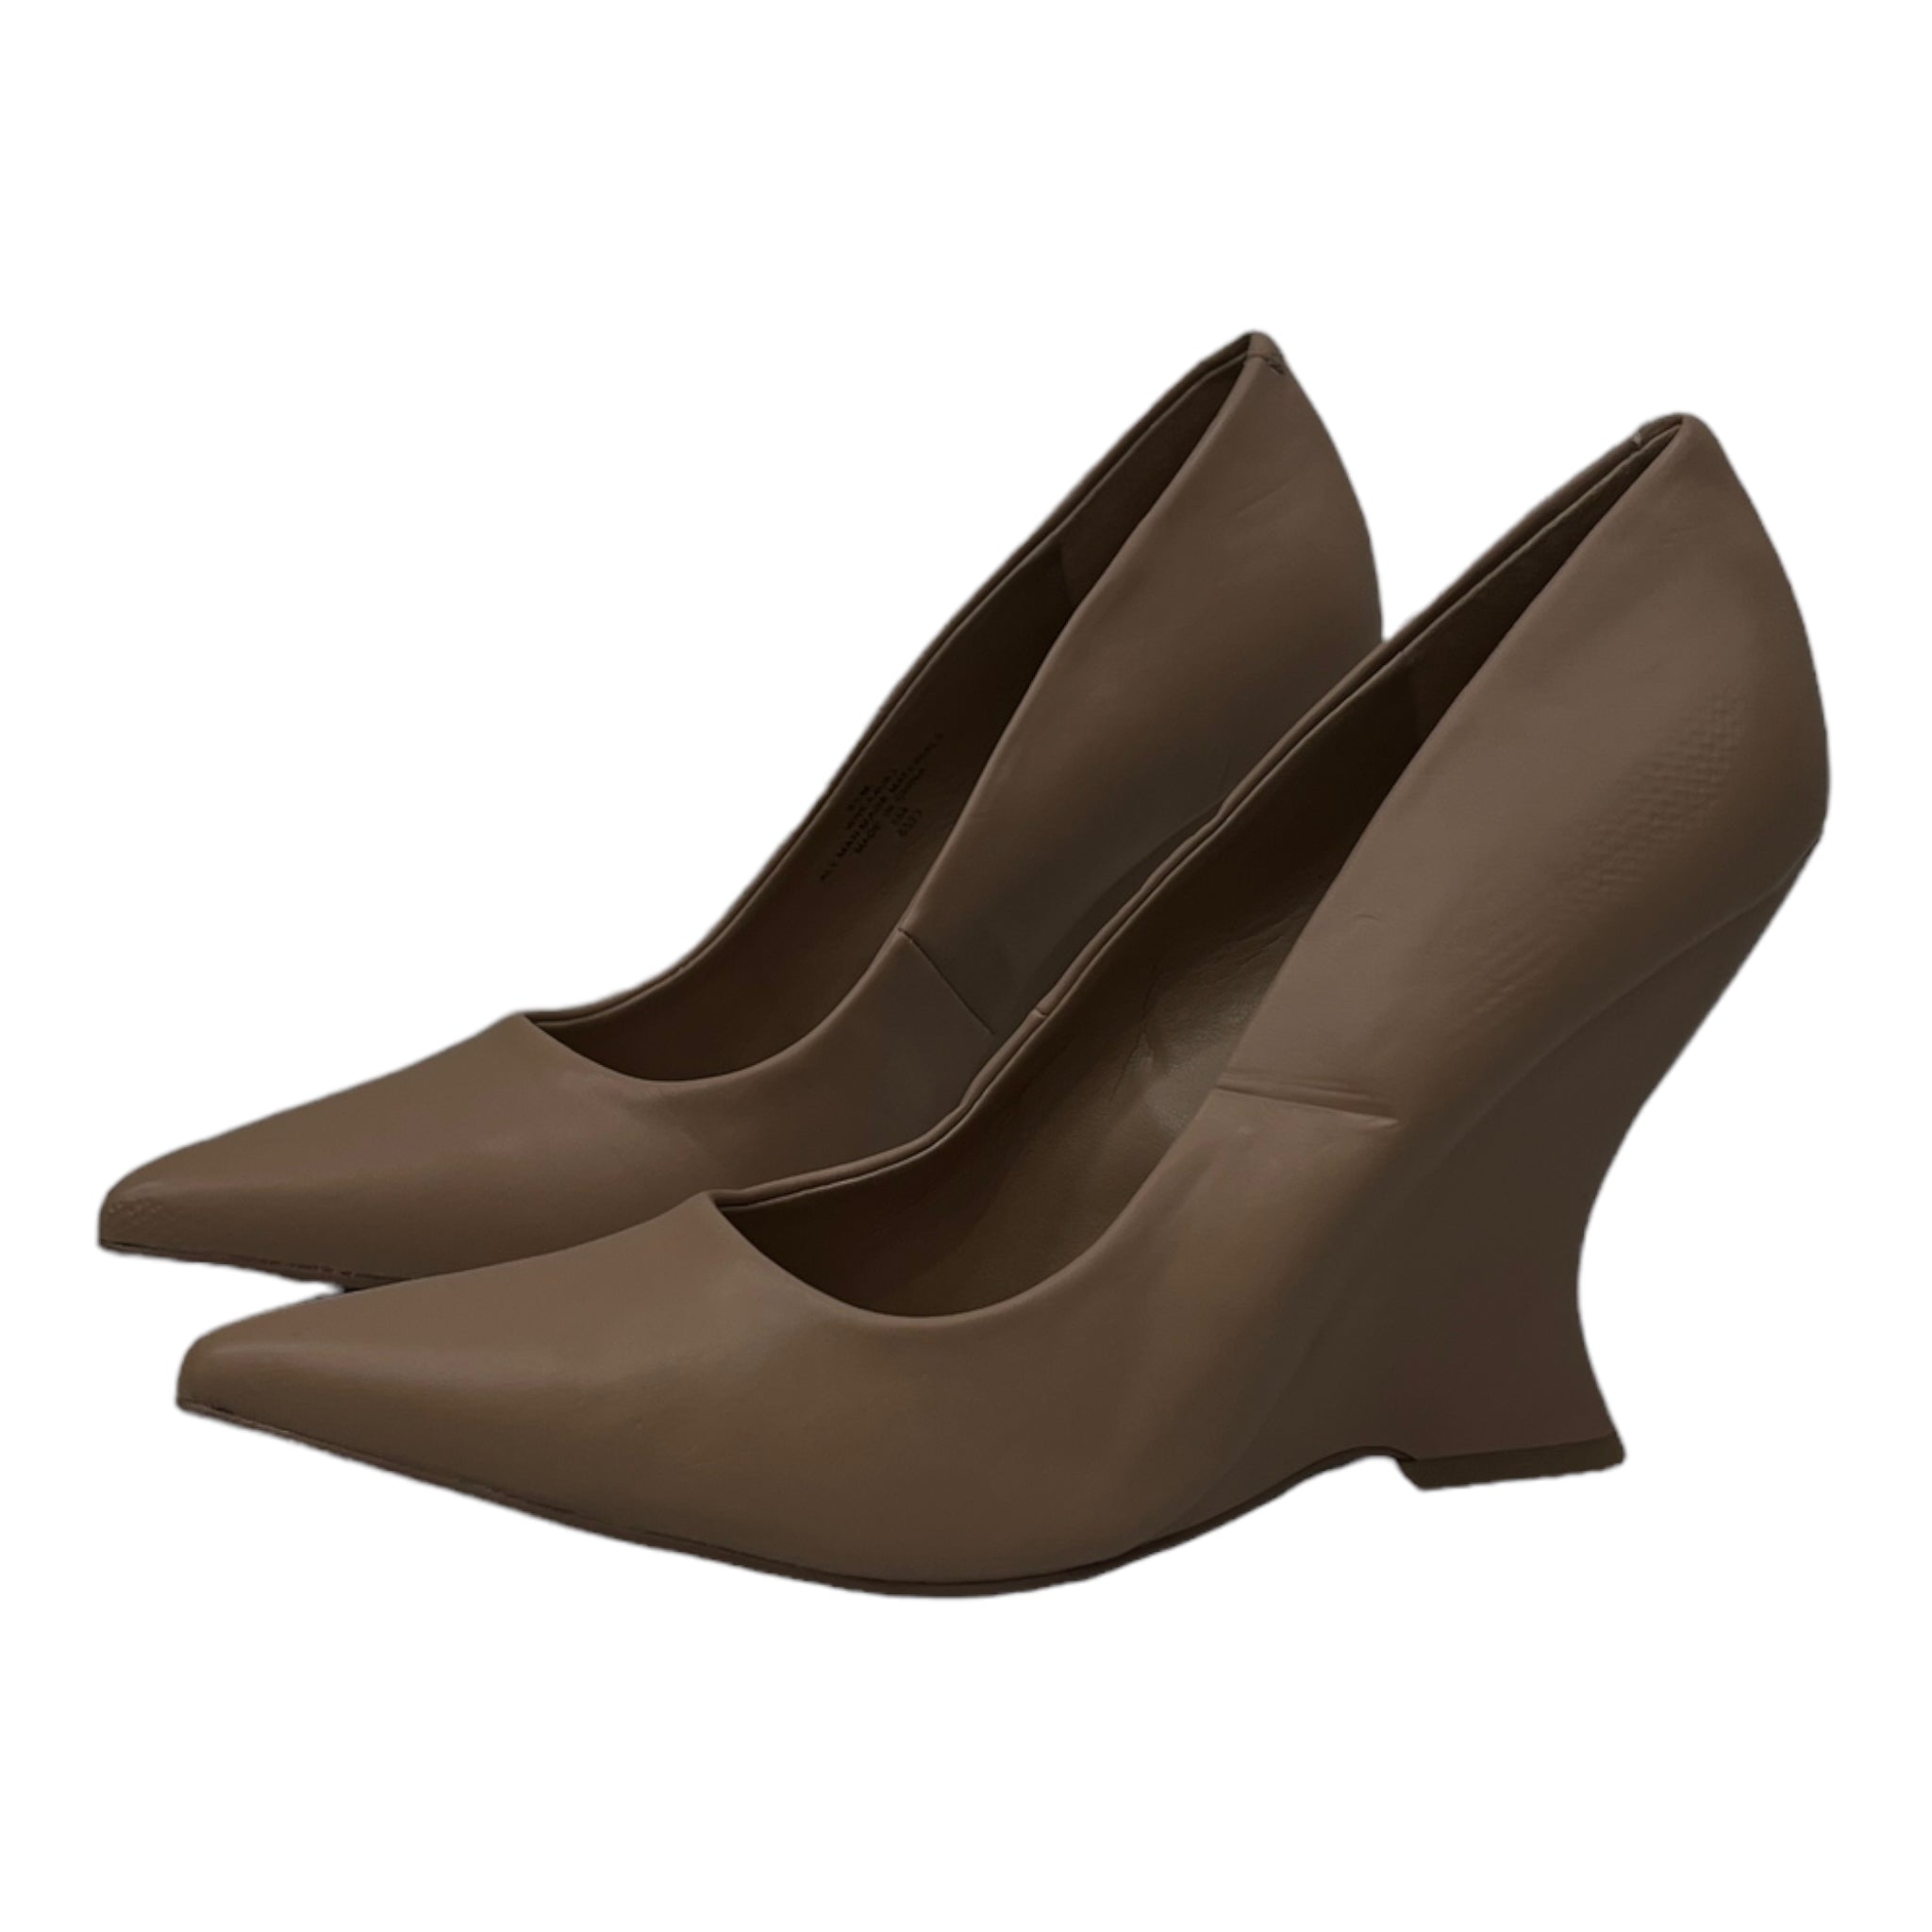 NINE WEST LEATHER POINTED TOE WEDGE PUMP IN NUDE